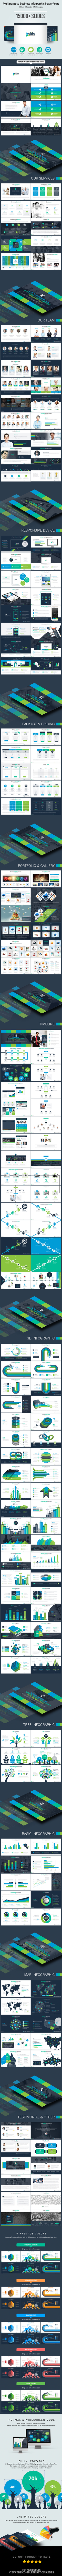 Multipurpose Business Infographic PowerPoint